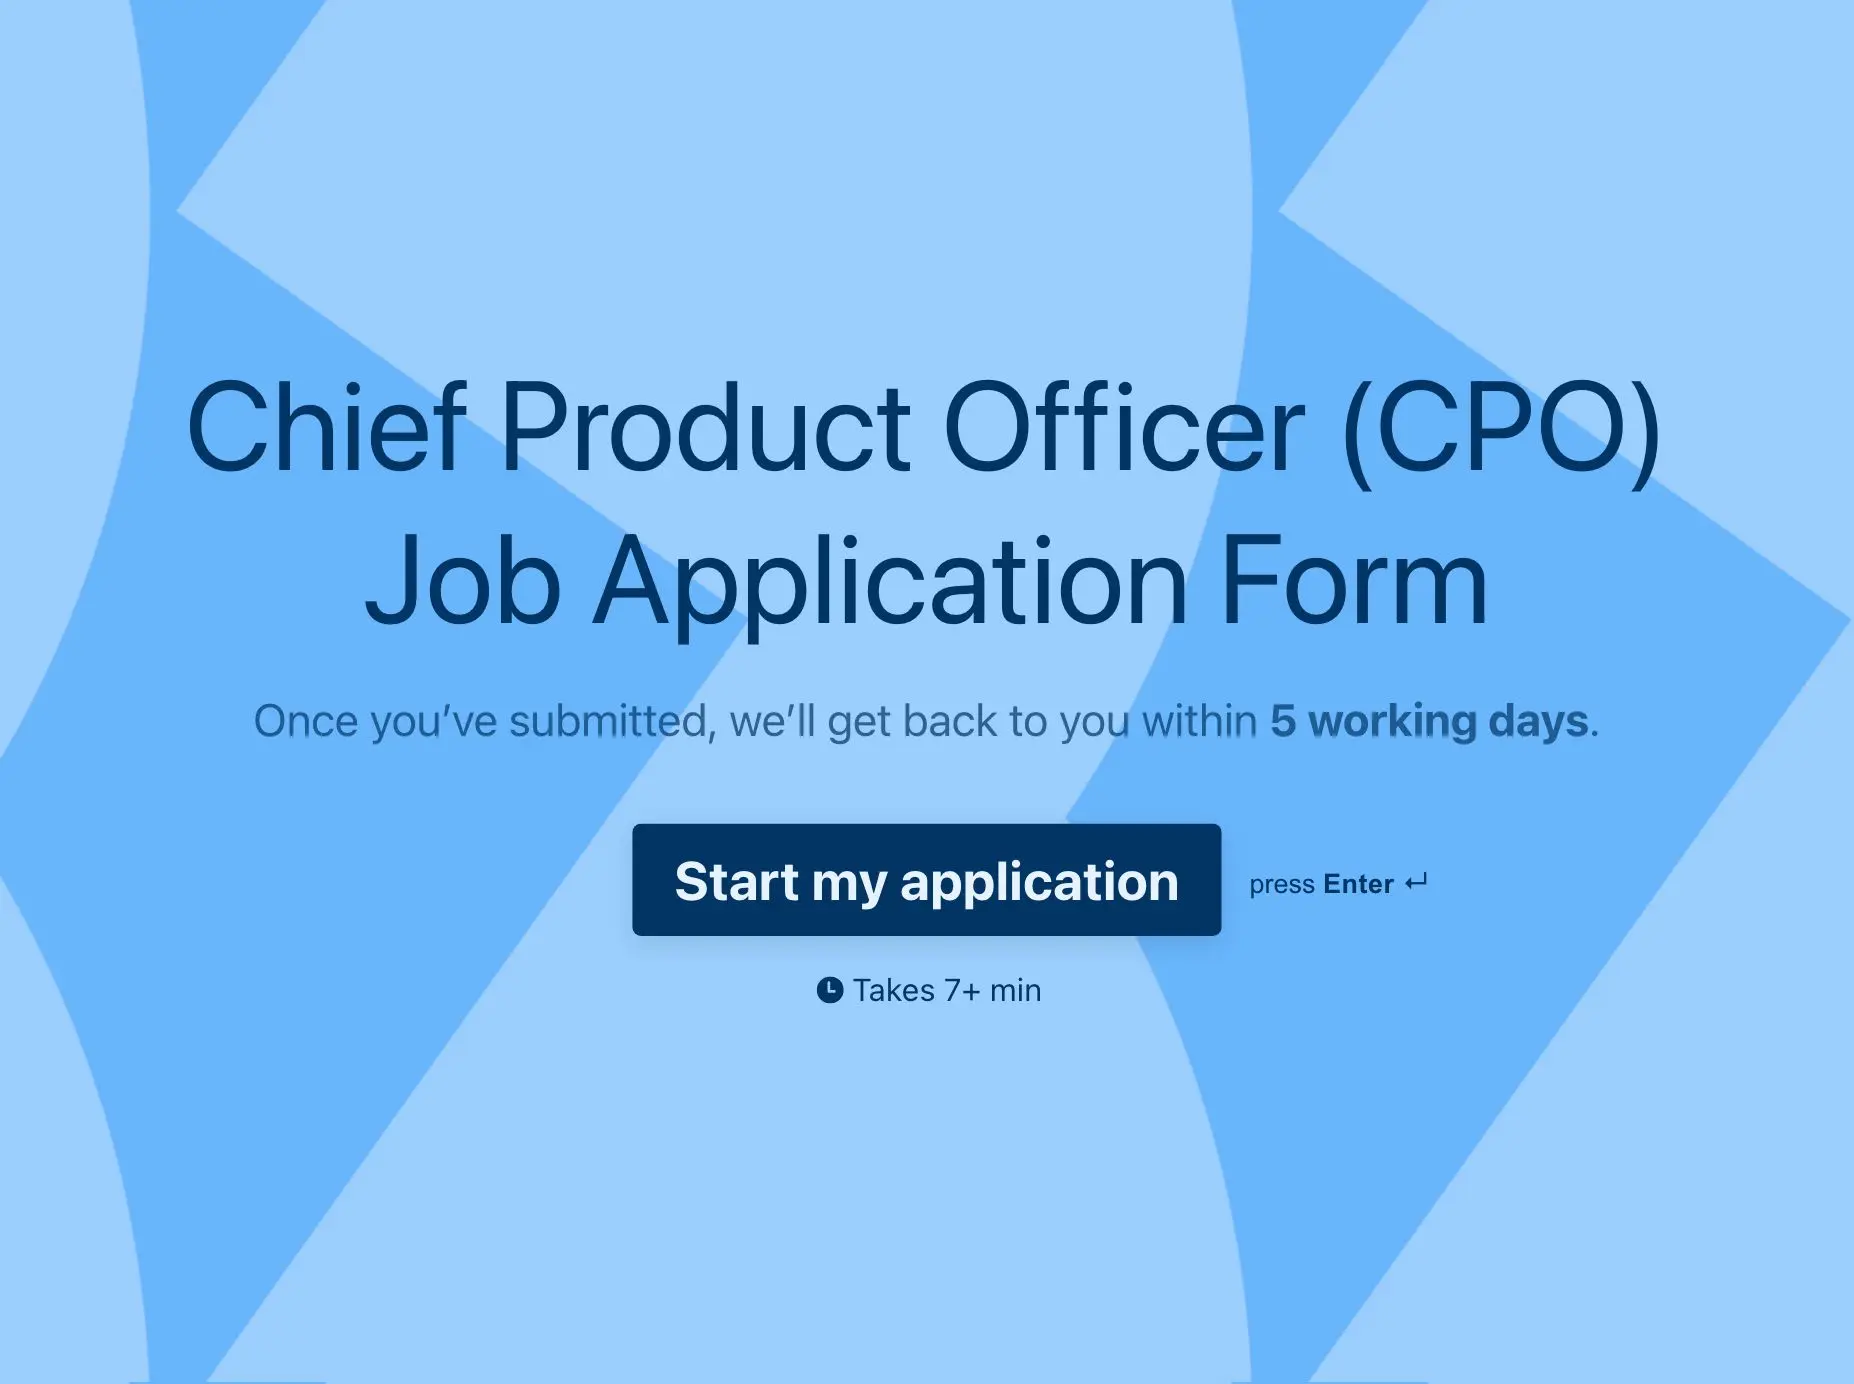 Chief Product Officer (CPO) Job Application Form Template Hero